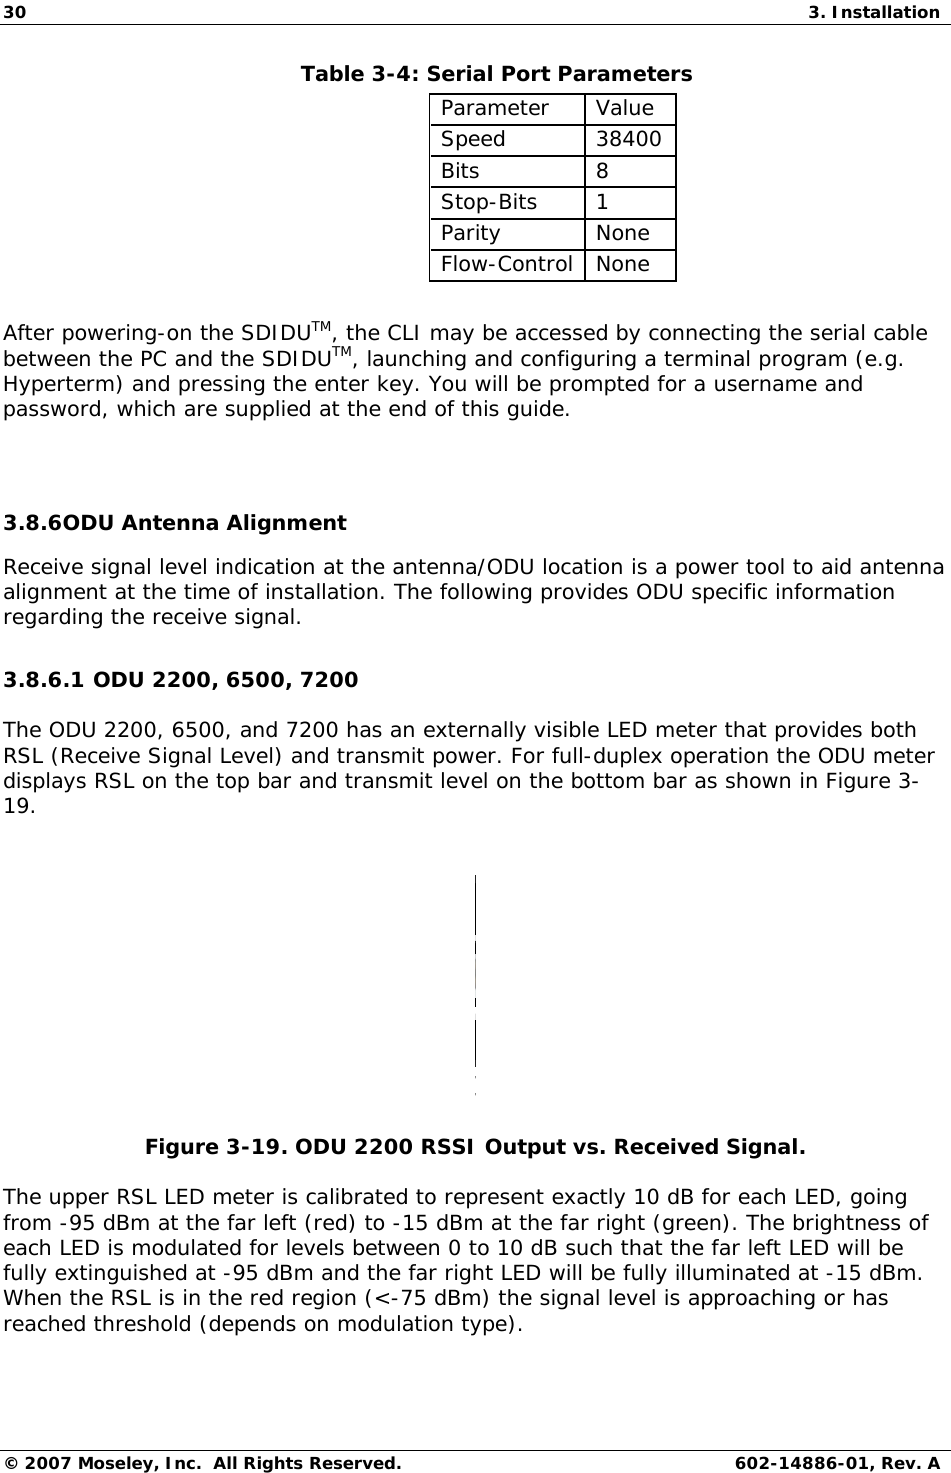 30 3. Installation © 2007 Moseley, Inc.  All Rights Reserved.  602-14886-01, Rev. A       Table 3-4: Serial Port Parameters  Parameter   Value  Speed   38400  Bits   8  Stop-Bits   1  Parity   None  Flow-Control  None   After powering-on the SDIDUTM, the CLI may be accessed by connecting the serial cable between the PC and the SDIDUTM, launching and configuring a terminal program (e.g. Hyperterm) and pressing the enter key. You will be prompted for a username and password, which are supplied at the end of this guide.   3.8.6ODU Antenna Alignment Receive signal level indication at the antenna/ODU location is a power tool to aid antenna alignment at the time of installation. The following provides ODU specific information regarding the receive signal. 3.8.6.1 ODU 2200, 6500, 7200 The ODU 2200, 6500, and 7200 has an externally visible LED meter that provides both RSL (Receive Signal Level) and transmit power. For full-duplex operation the ODU meter displays RSL on the top bar and transmit level on the bottom bar as shown in Figure 3-19.  xwww Figure 3-19. ODU 2200 RSSI Output vs. Received Signal.  The upper RSL LED meter is calibrated to represent exactly 10 dB for each LED, going from -95 dBm at the far left (red) to -15 dBm at the far right (green). The brightness of each LED is modulated for levels between 0 to 10 dB such that the far left LED will be fully extinguished at -95 dBm and the far right LED will be fully illuminated at -15 dBm. When the RSL is in the red region (&lt;-75 dBm) the signal level is approaching or has reached threshold (depends on modulation type). 